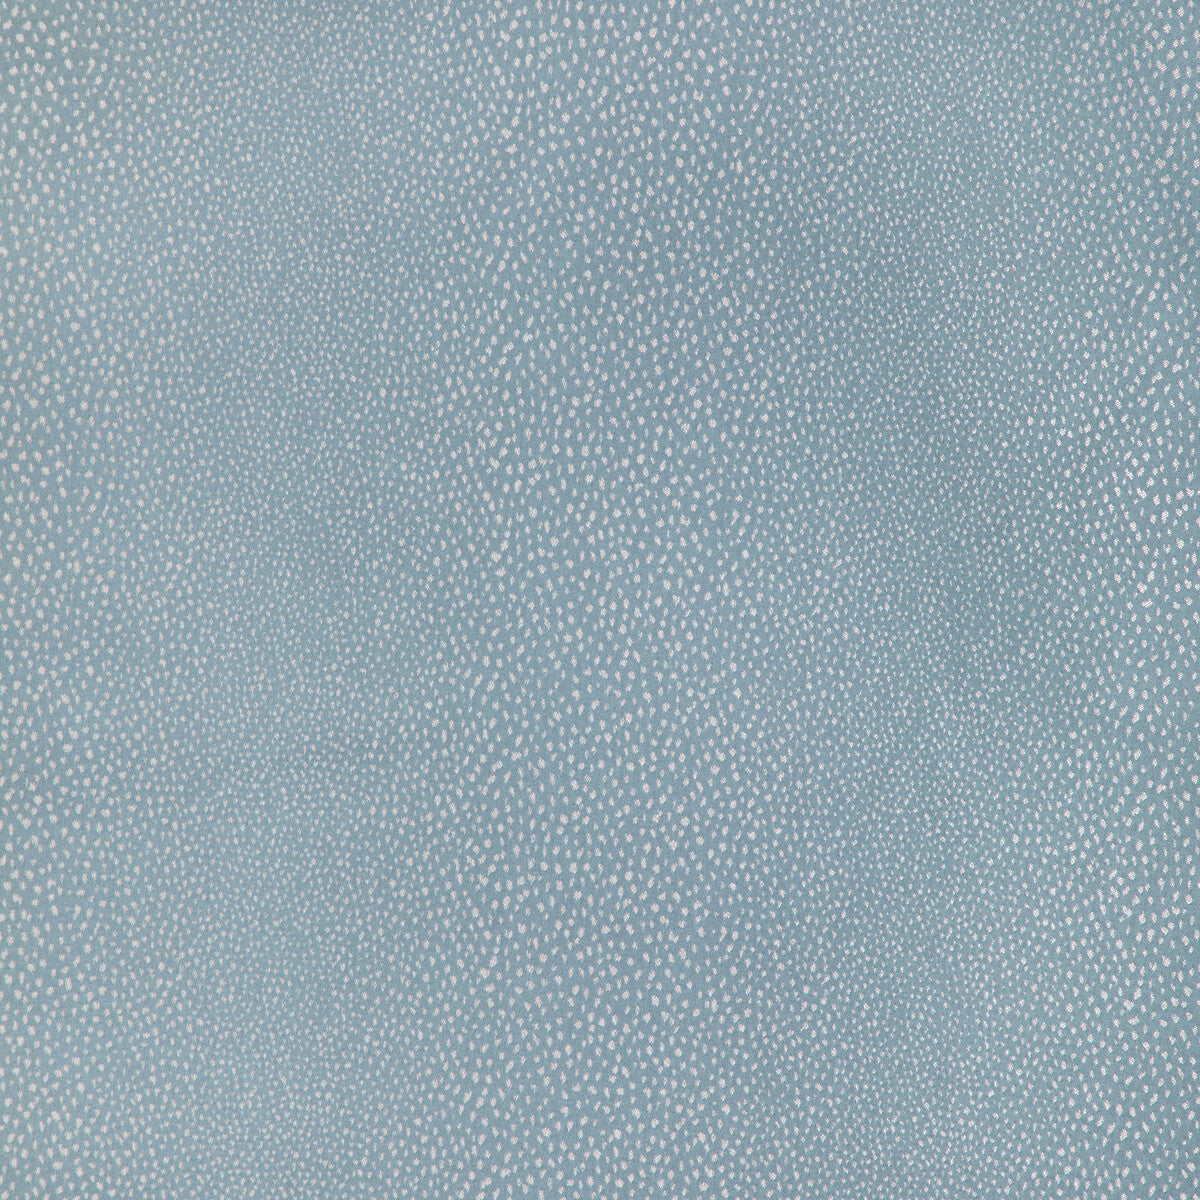 Evening Drizzle fabric in slate color - pattern 36757.52.0 - by Kravet Design in the Candice Olson collection